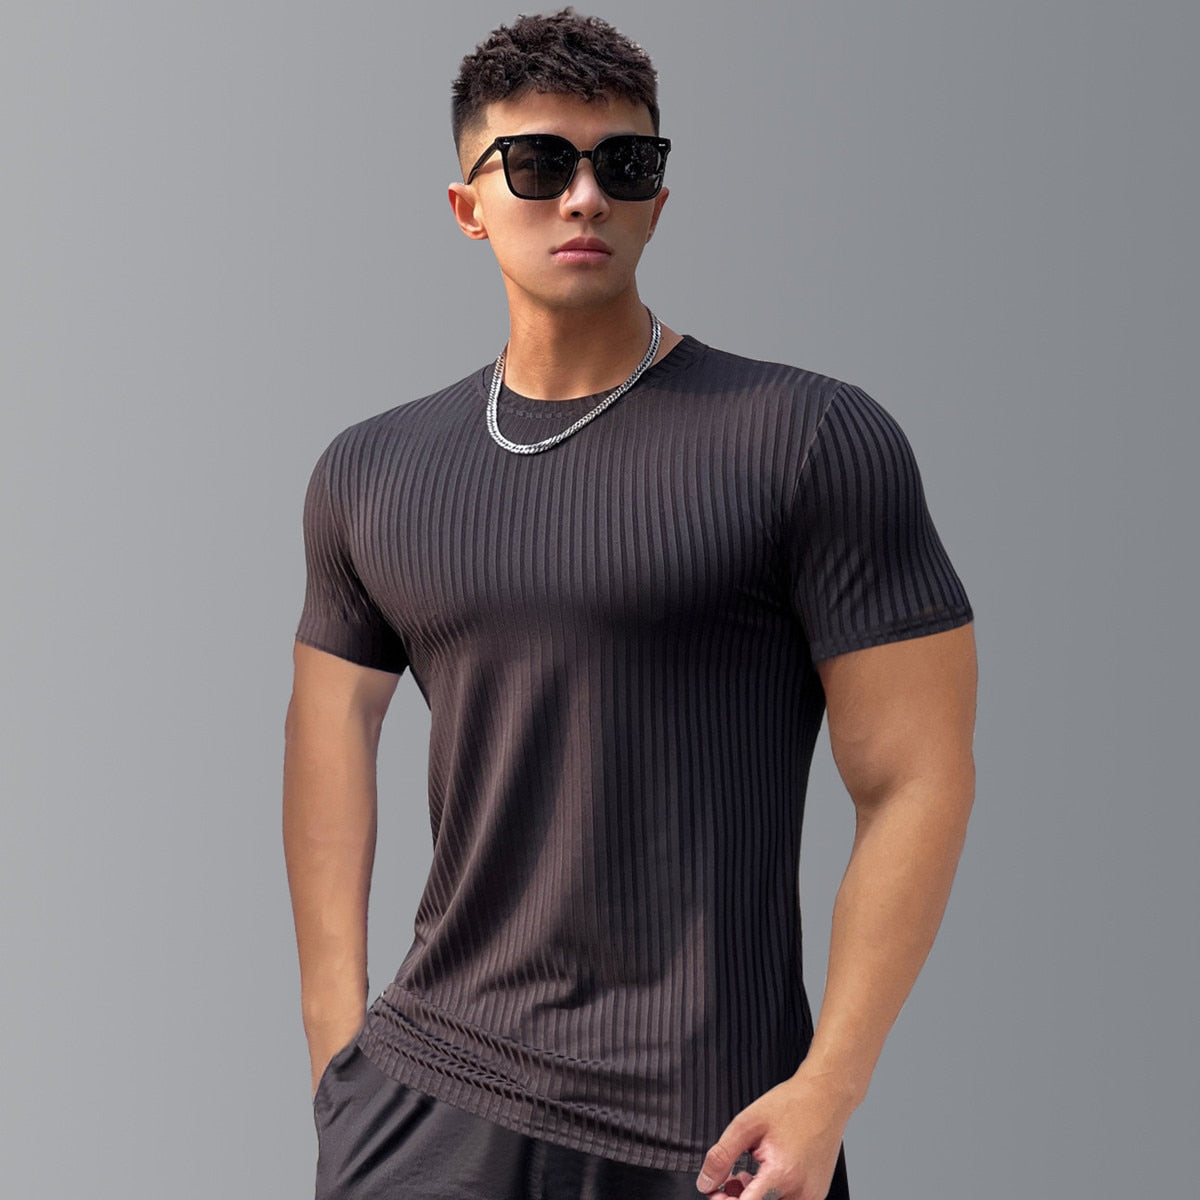 Summer Fitness T-shirt Men Casual Short Sleeve Shirt Male Gym Bodybuilding Skinny Tees Tops Running Sport Quick Dry Clothing